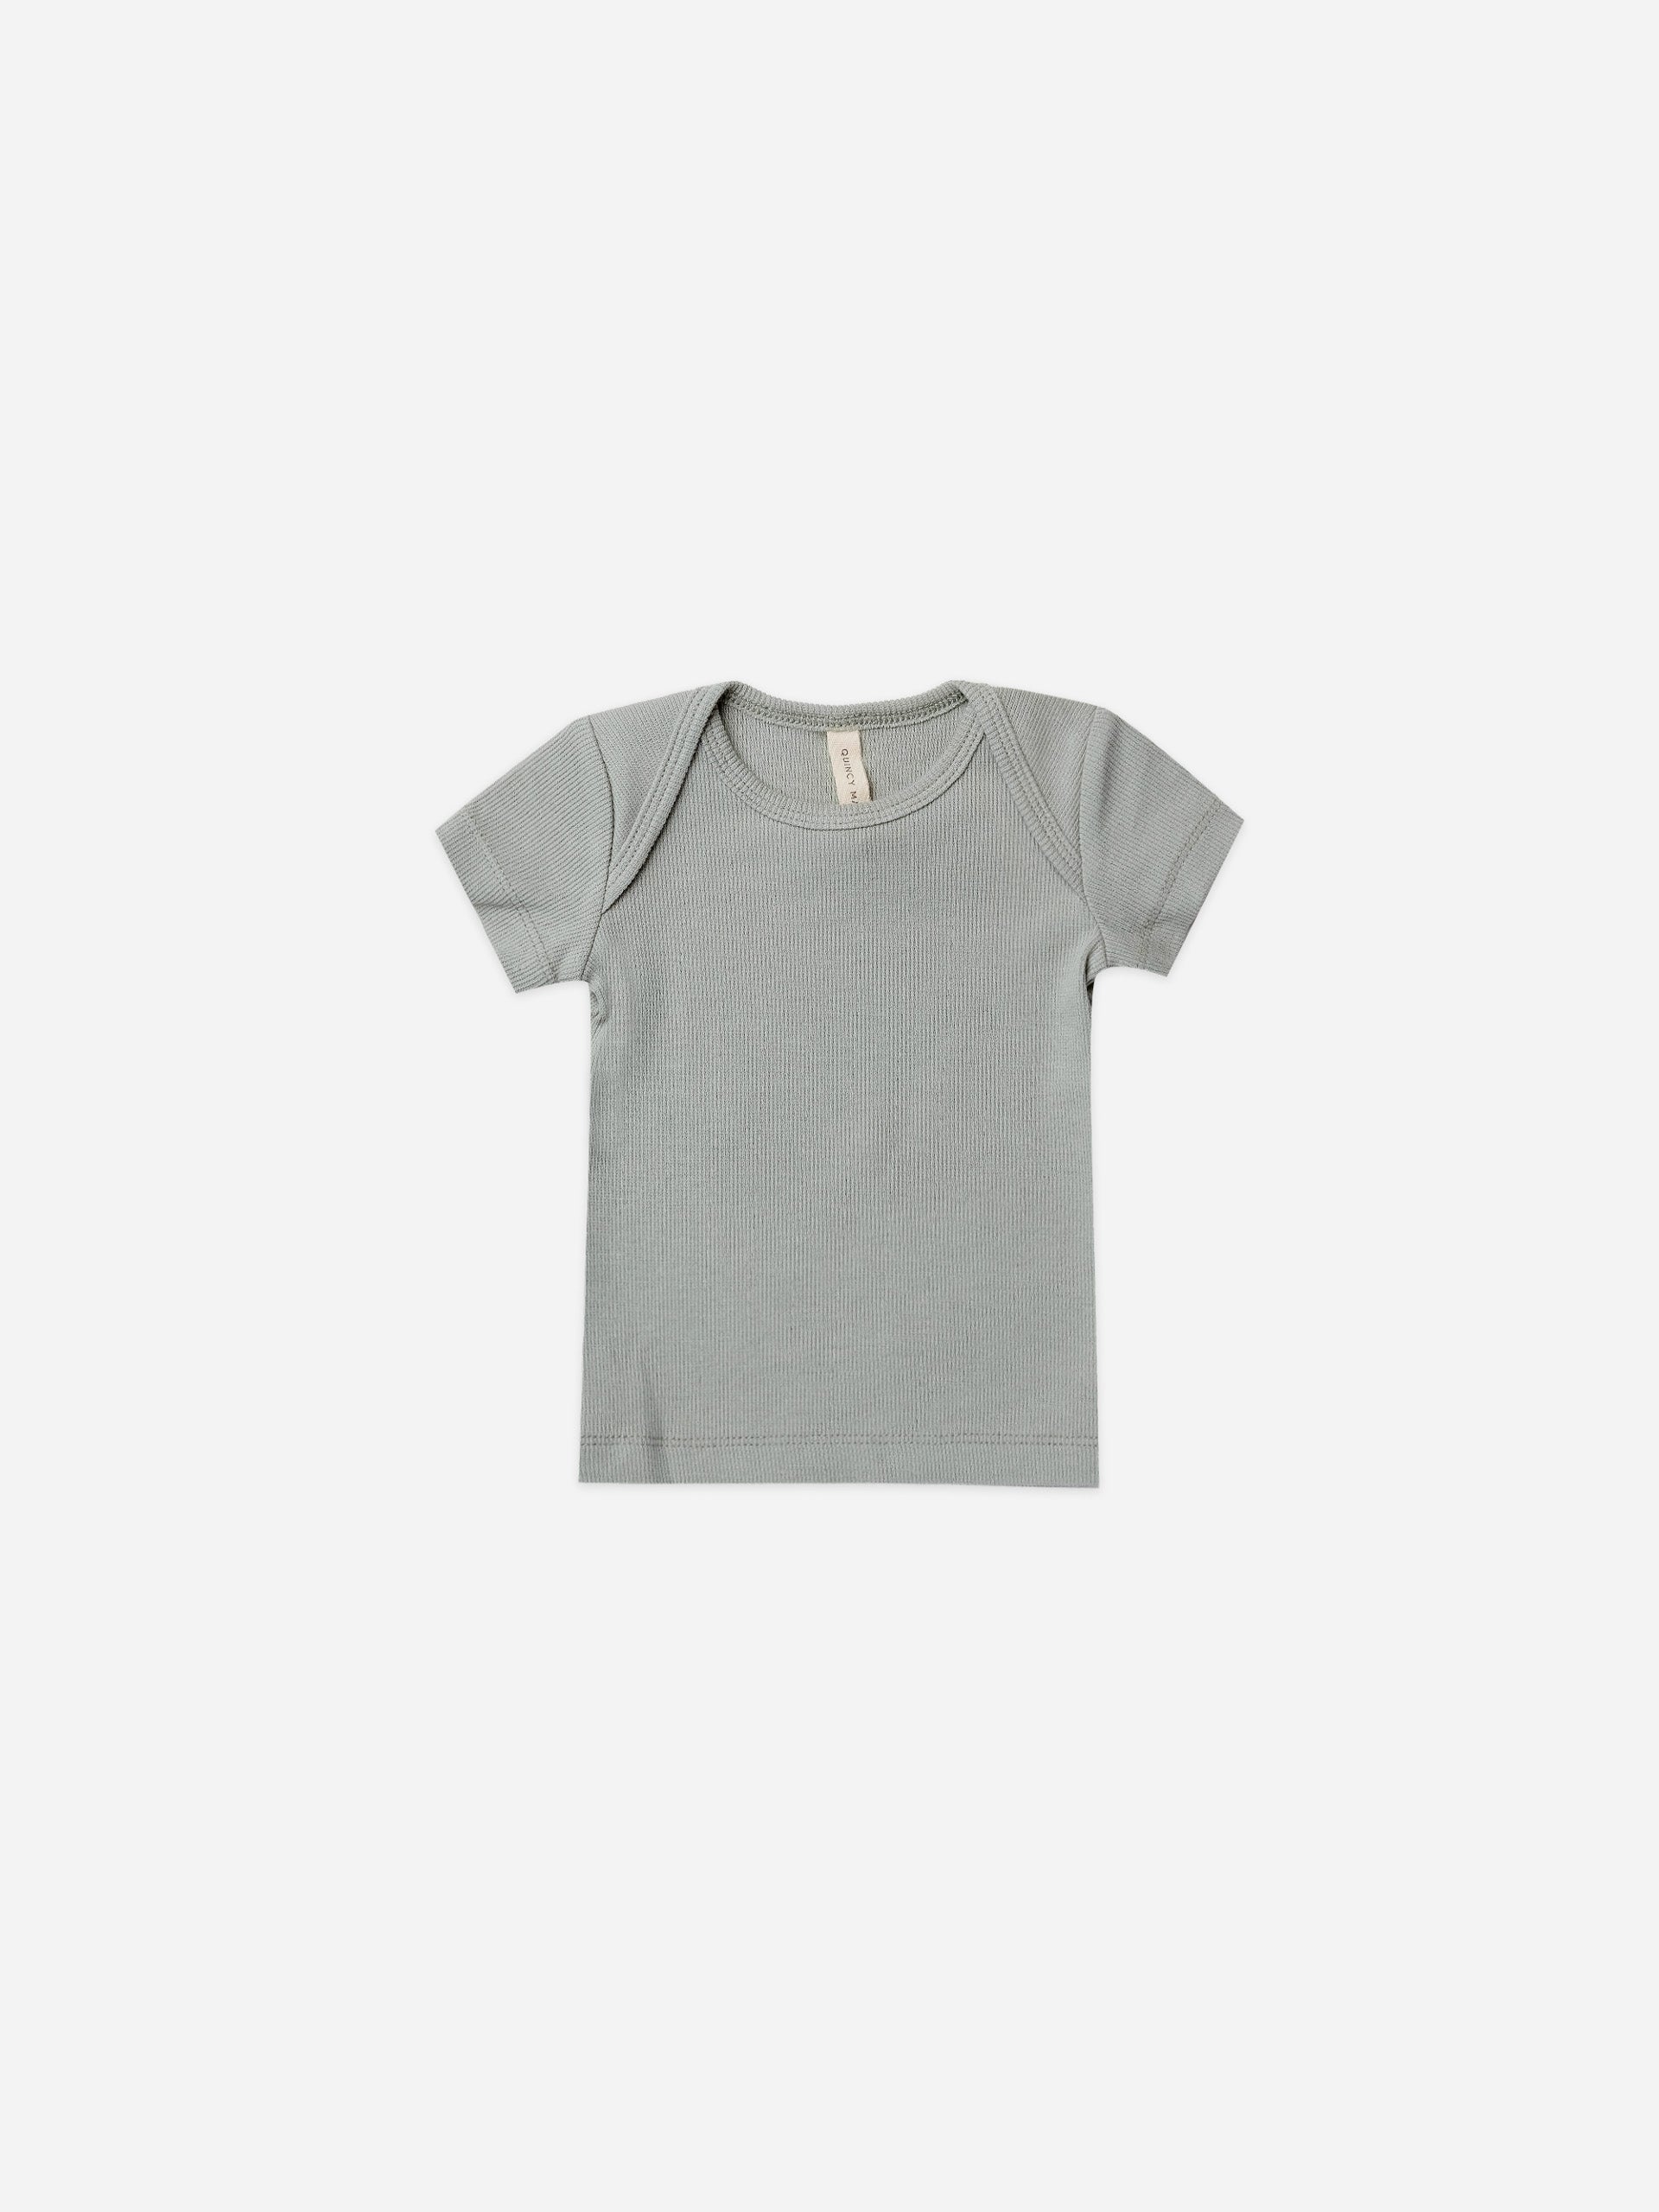 ribbed short sleeve tee | sky - Quincy Mae | Baby Basics | Baby Clothing | Organic Baby Clothes | Modern Baby Boy Clothes |